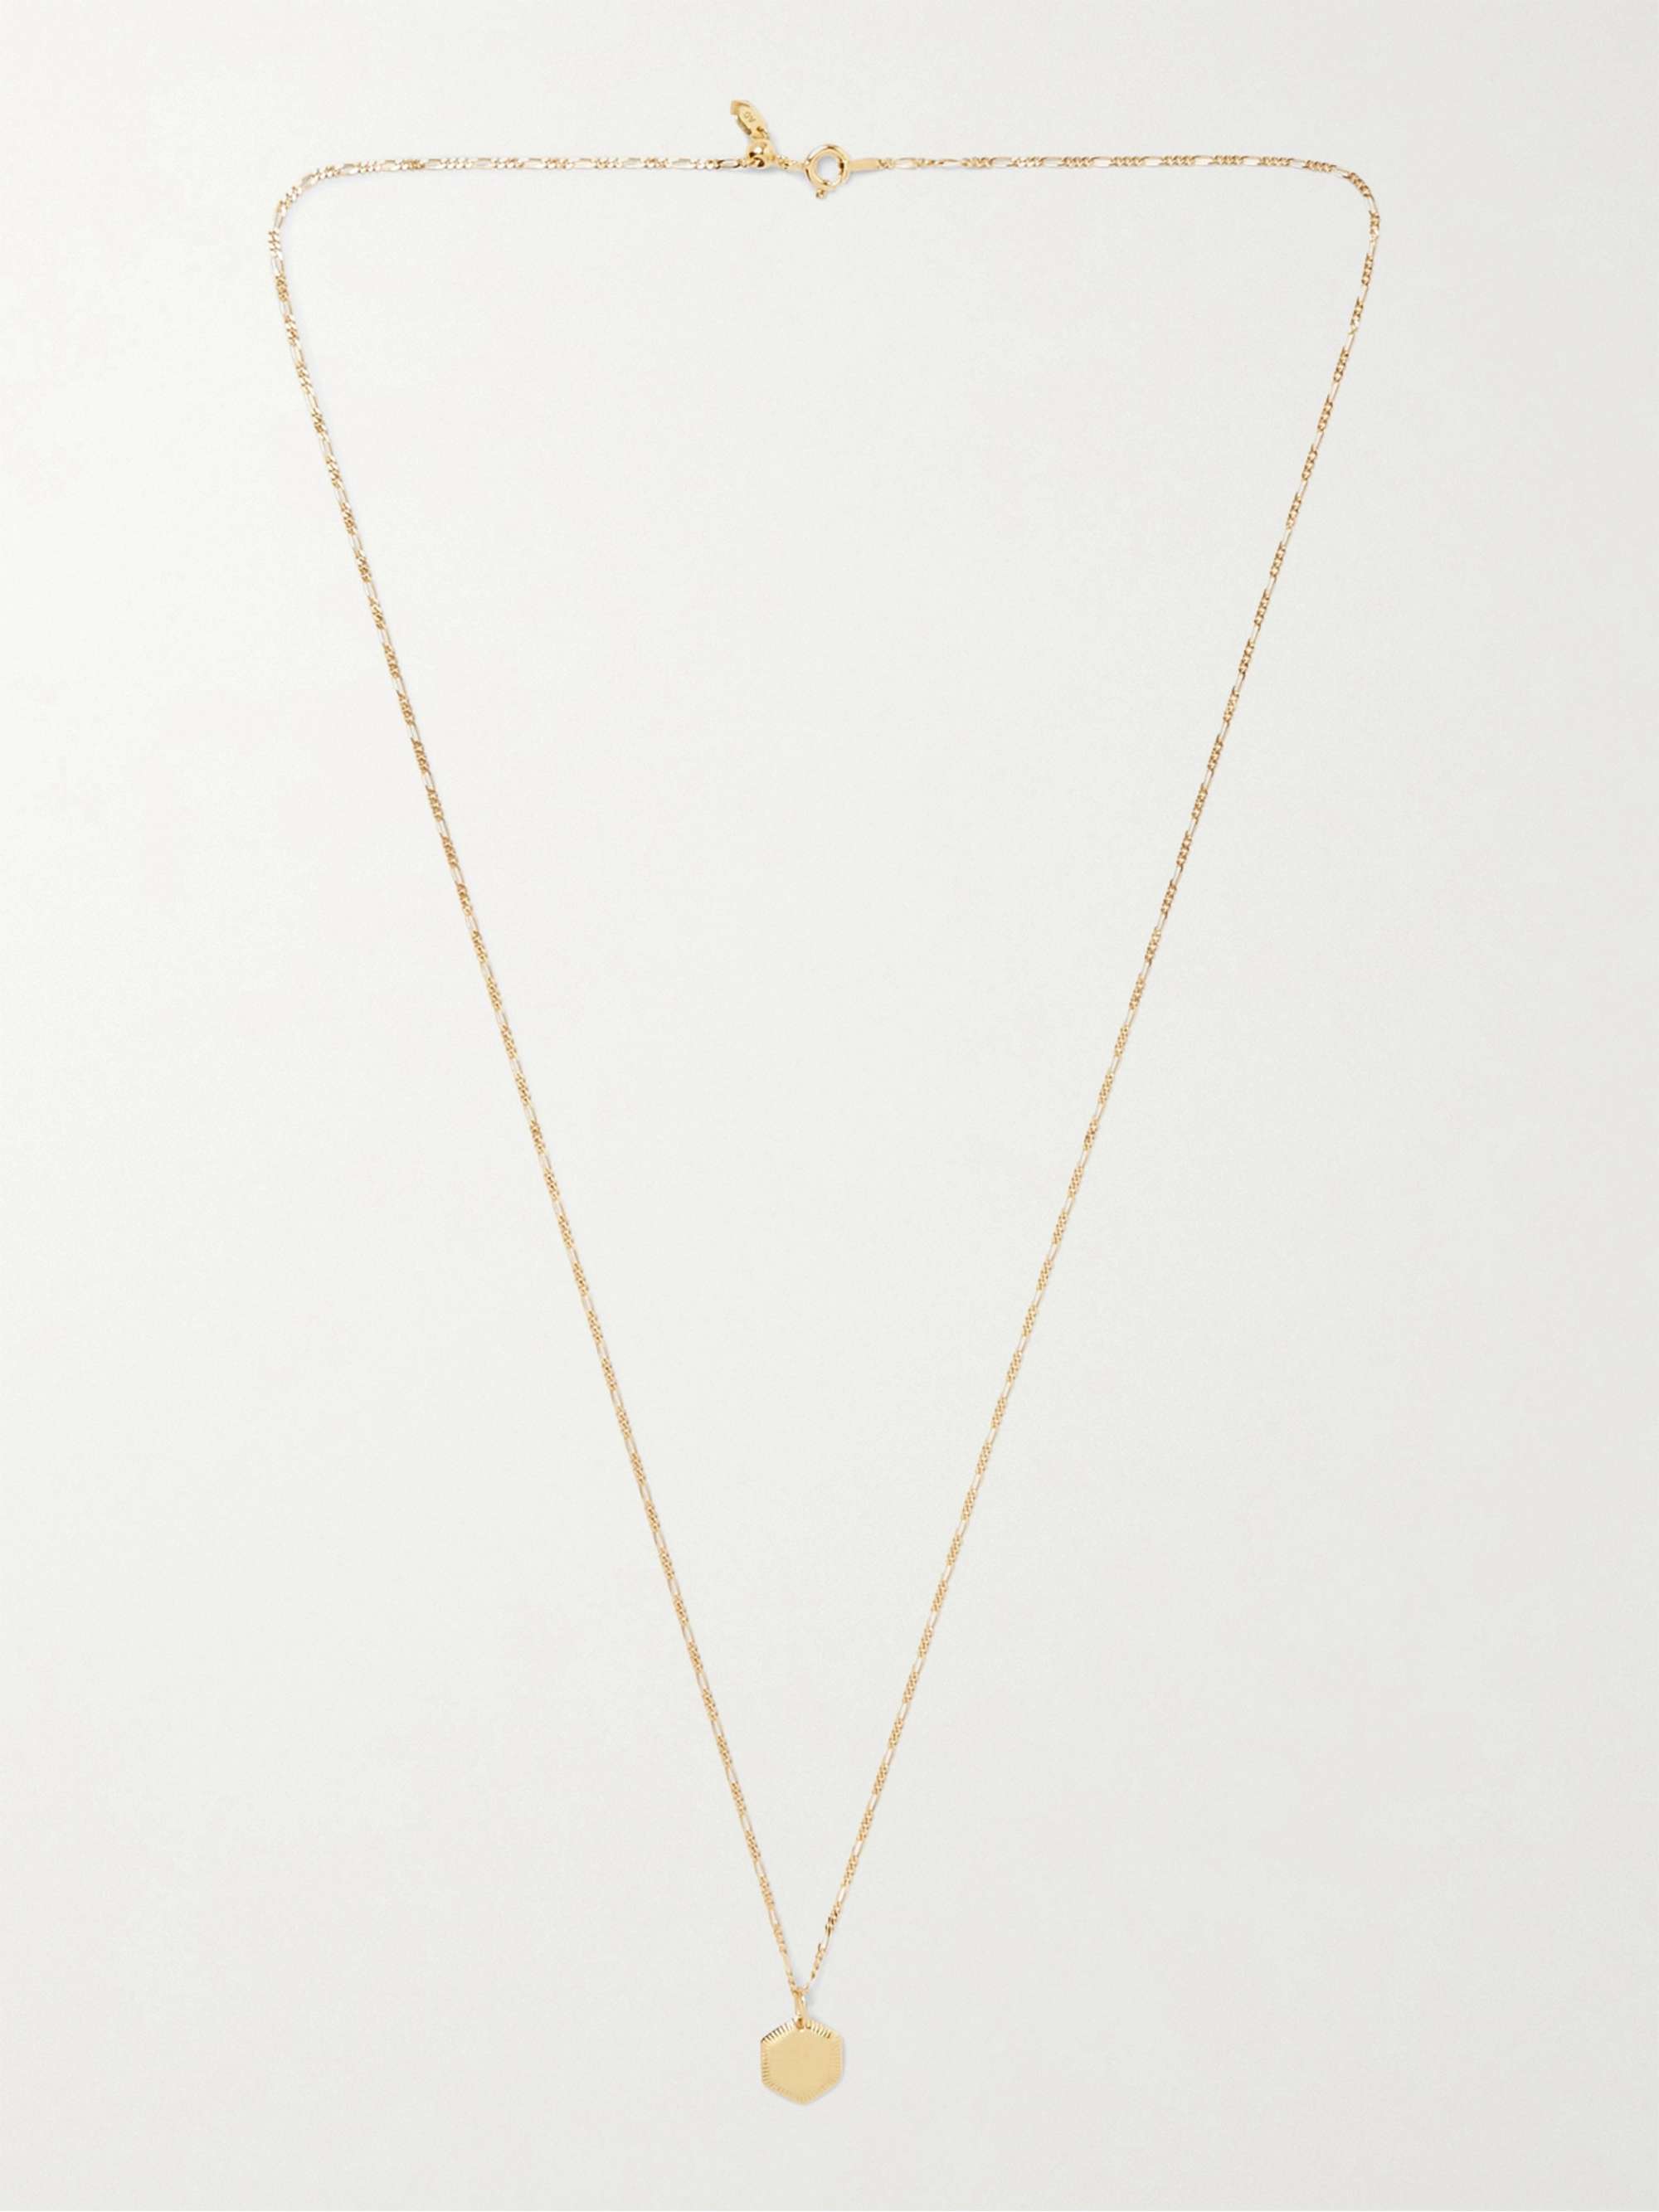 MARIA BLACK Kim Gold-Plated Necklace